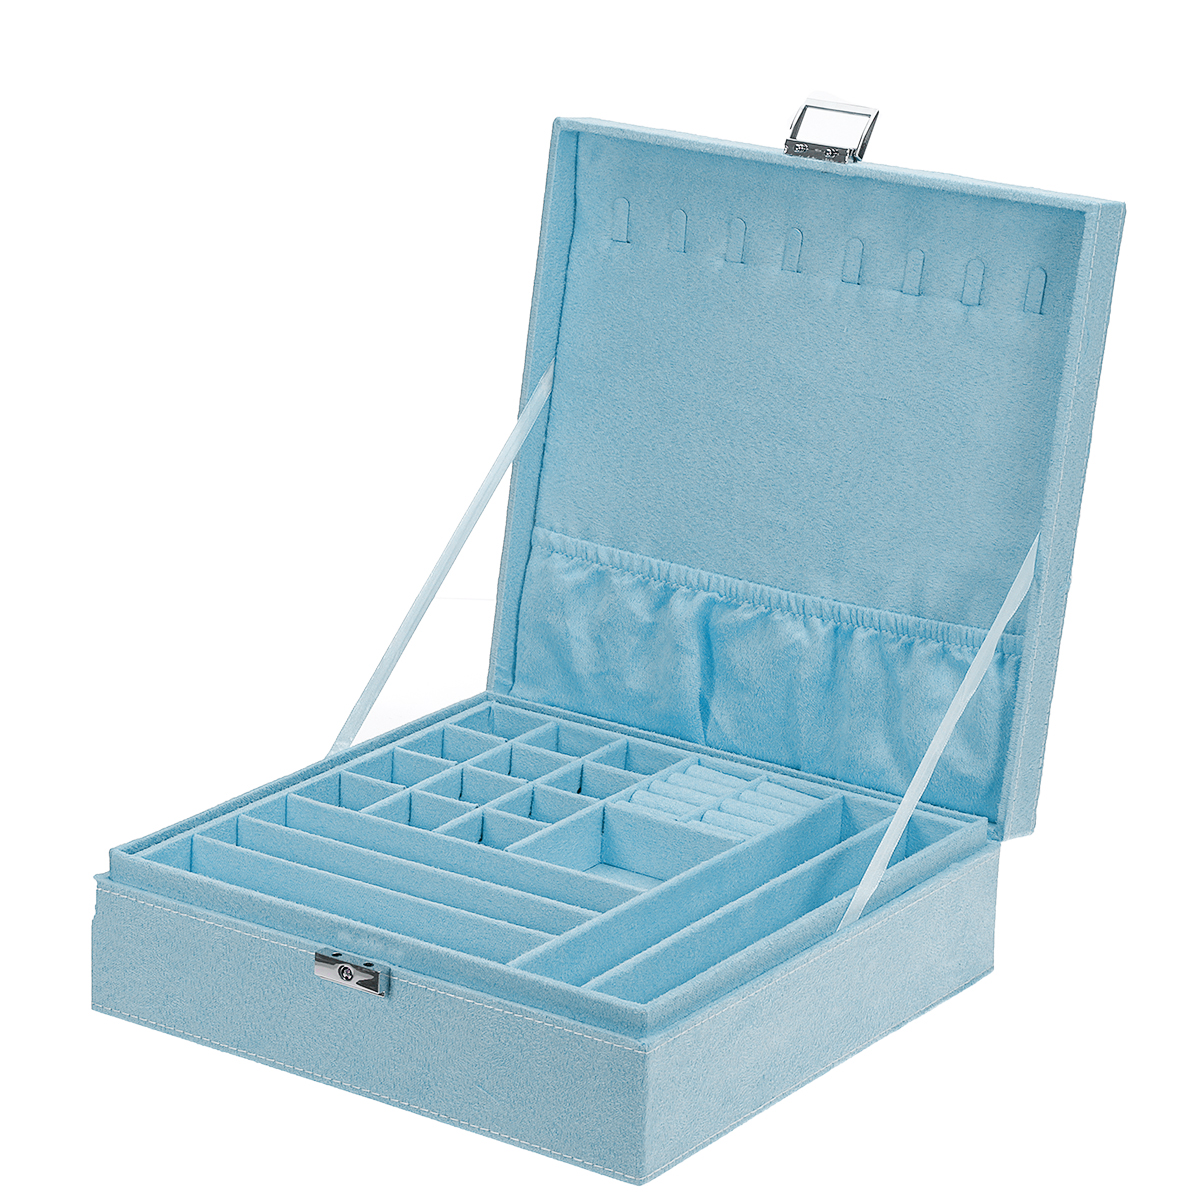 Multi-function-Vintage-Jewelry-Box-Organizers-Two-layer-Lockable-Jewelry-Display-Storage-Case-1855370-27